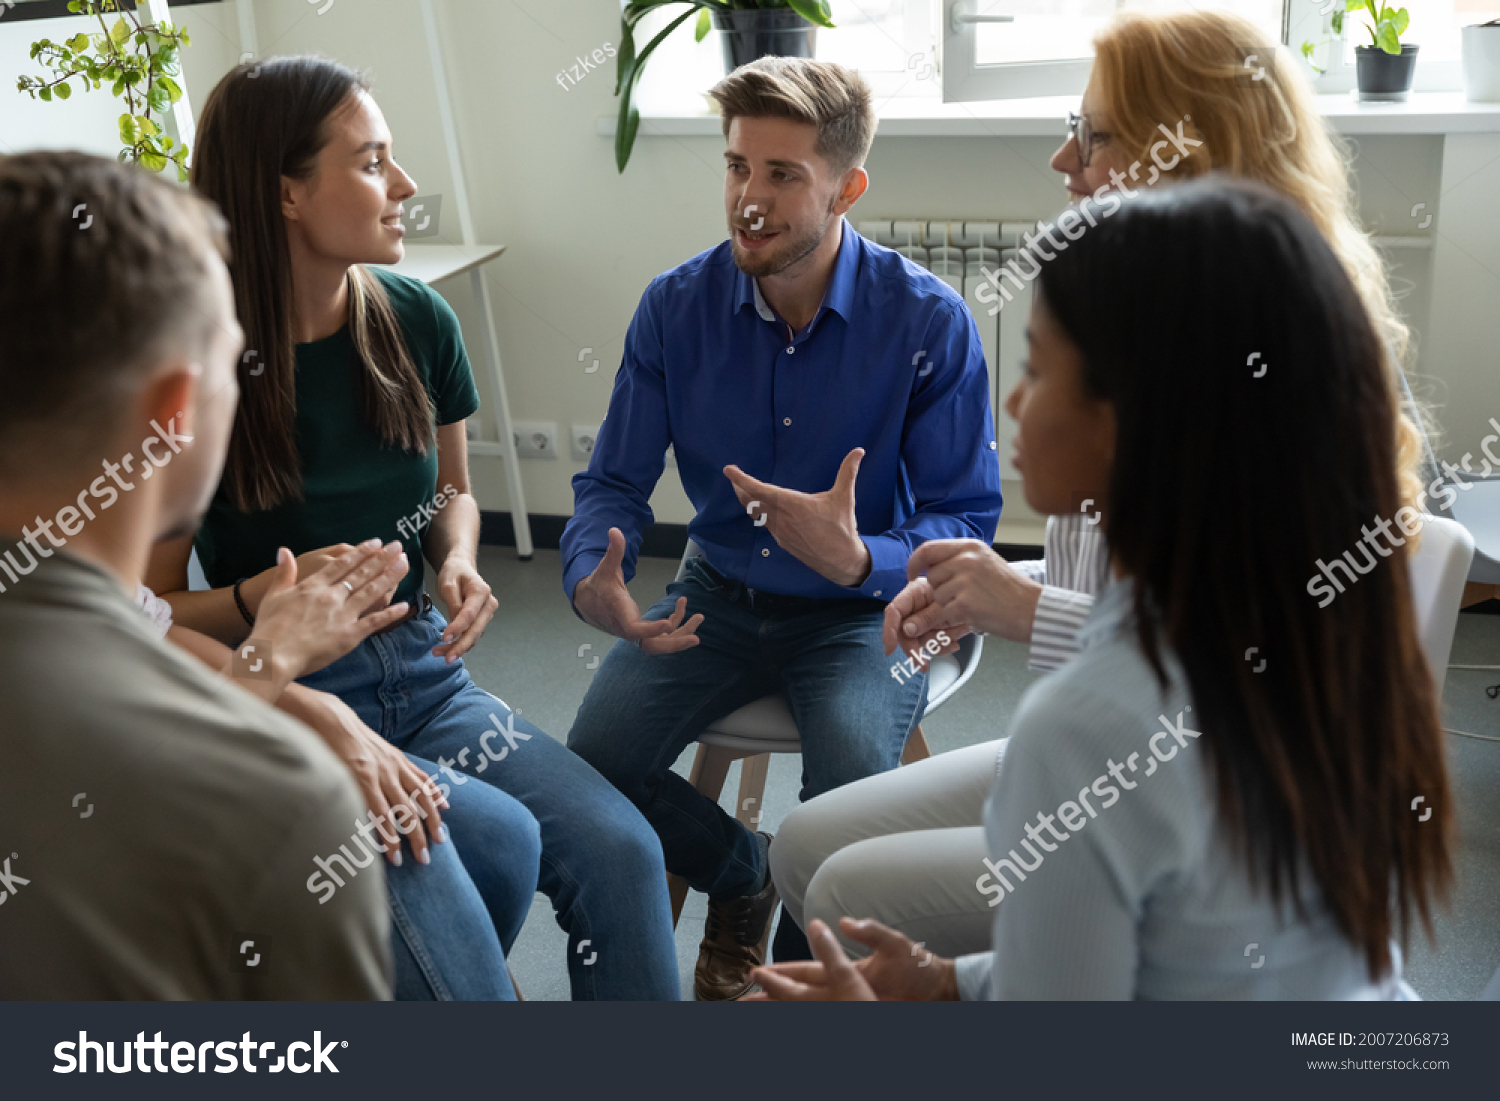 Work addict people talking on group therapy meeting, sitting in circle, discussing addiction, mental health problems. Counselor speaking, giving support and advice to team for successful recovery #2007206873